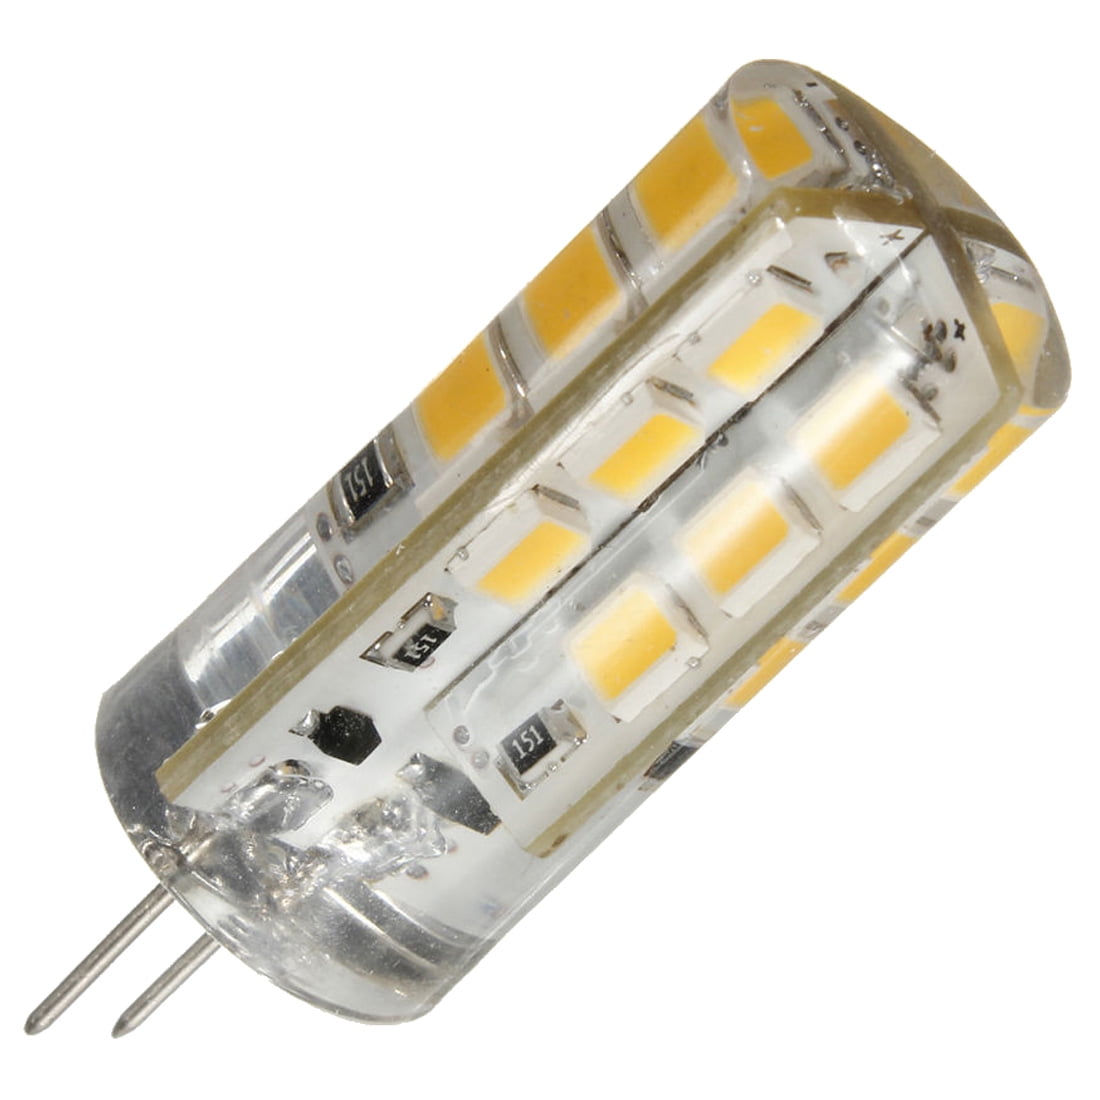 Dimmable LED Light G4 3W DC12V Silicone White=Daylight Repalce Halogen JC Bulb 